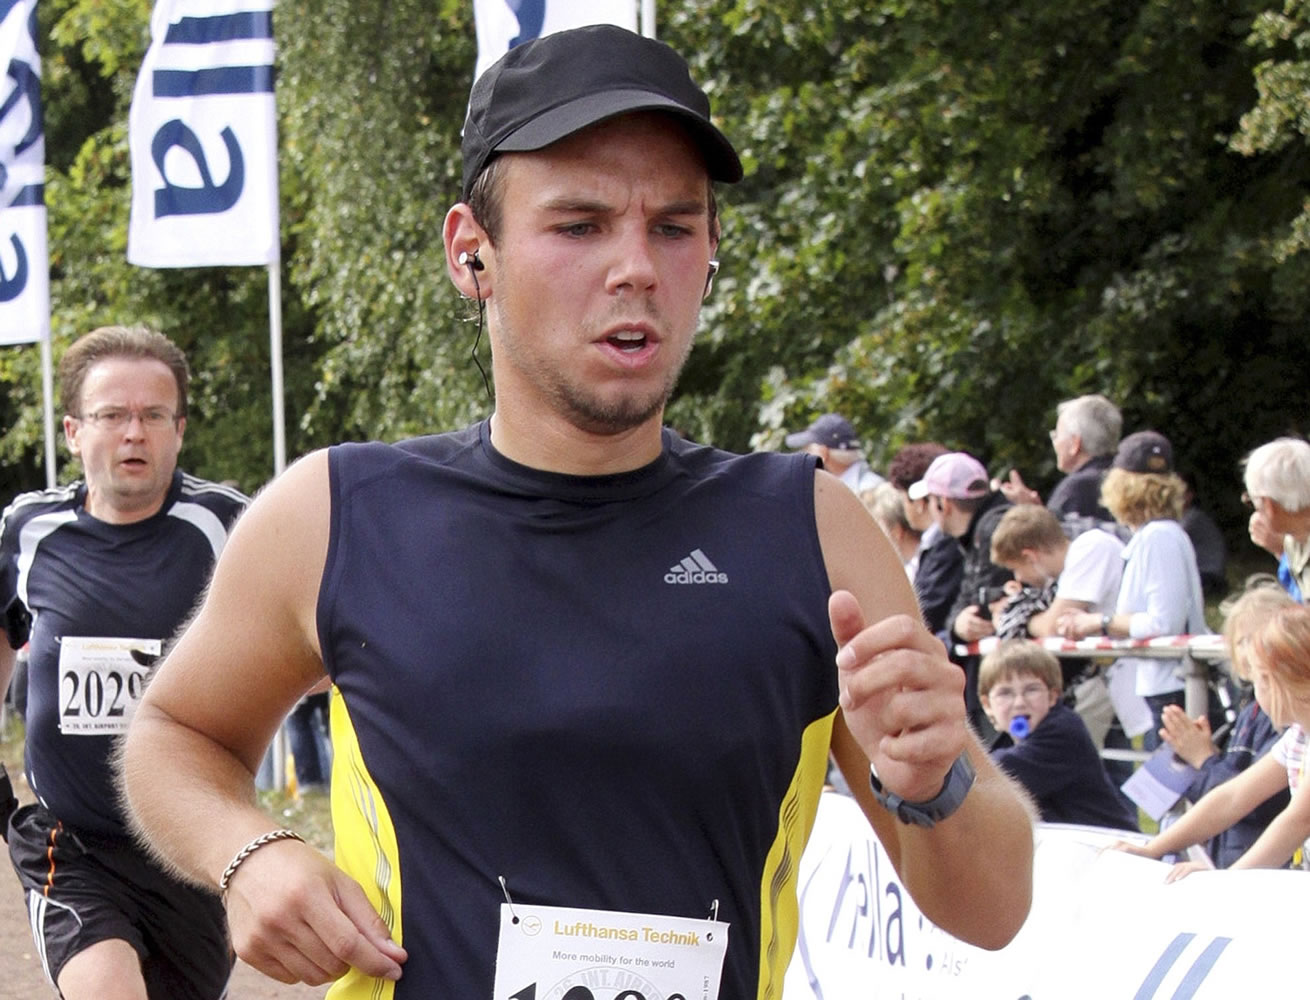 Andreas Lubitz competes Sept. 13, 2009 at the Airportrun in Hamburg, northern Germany.